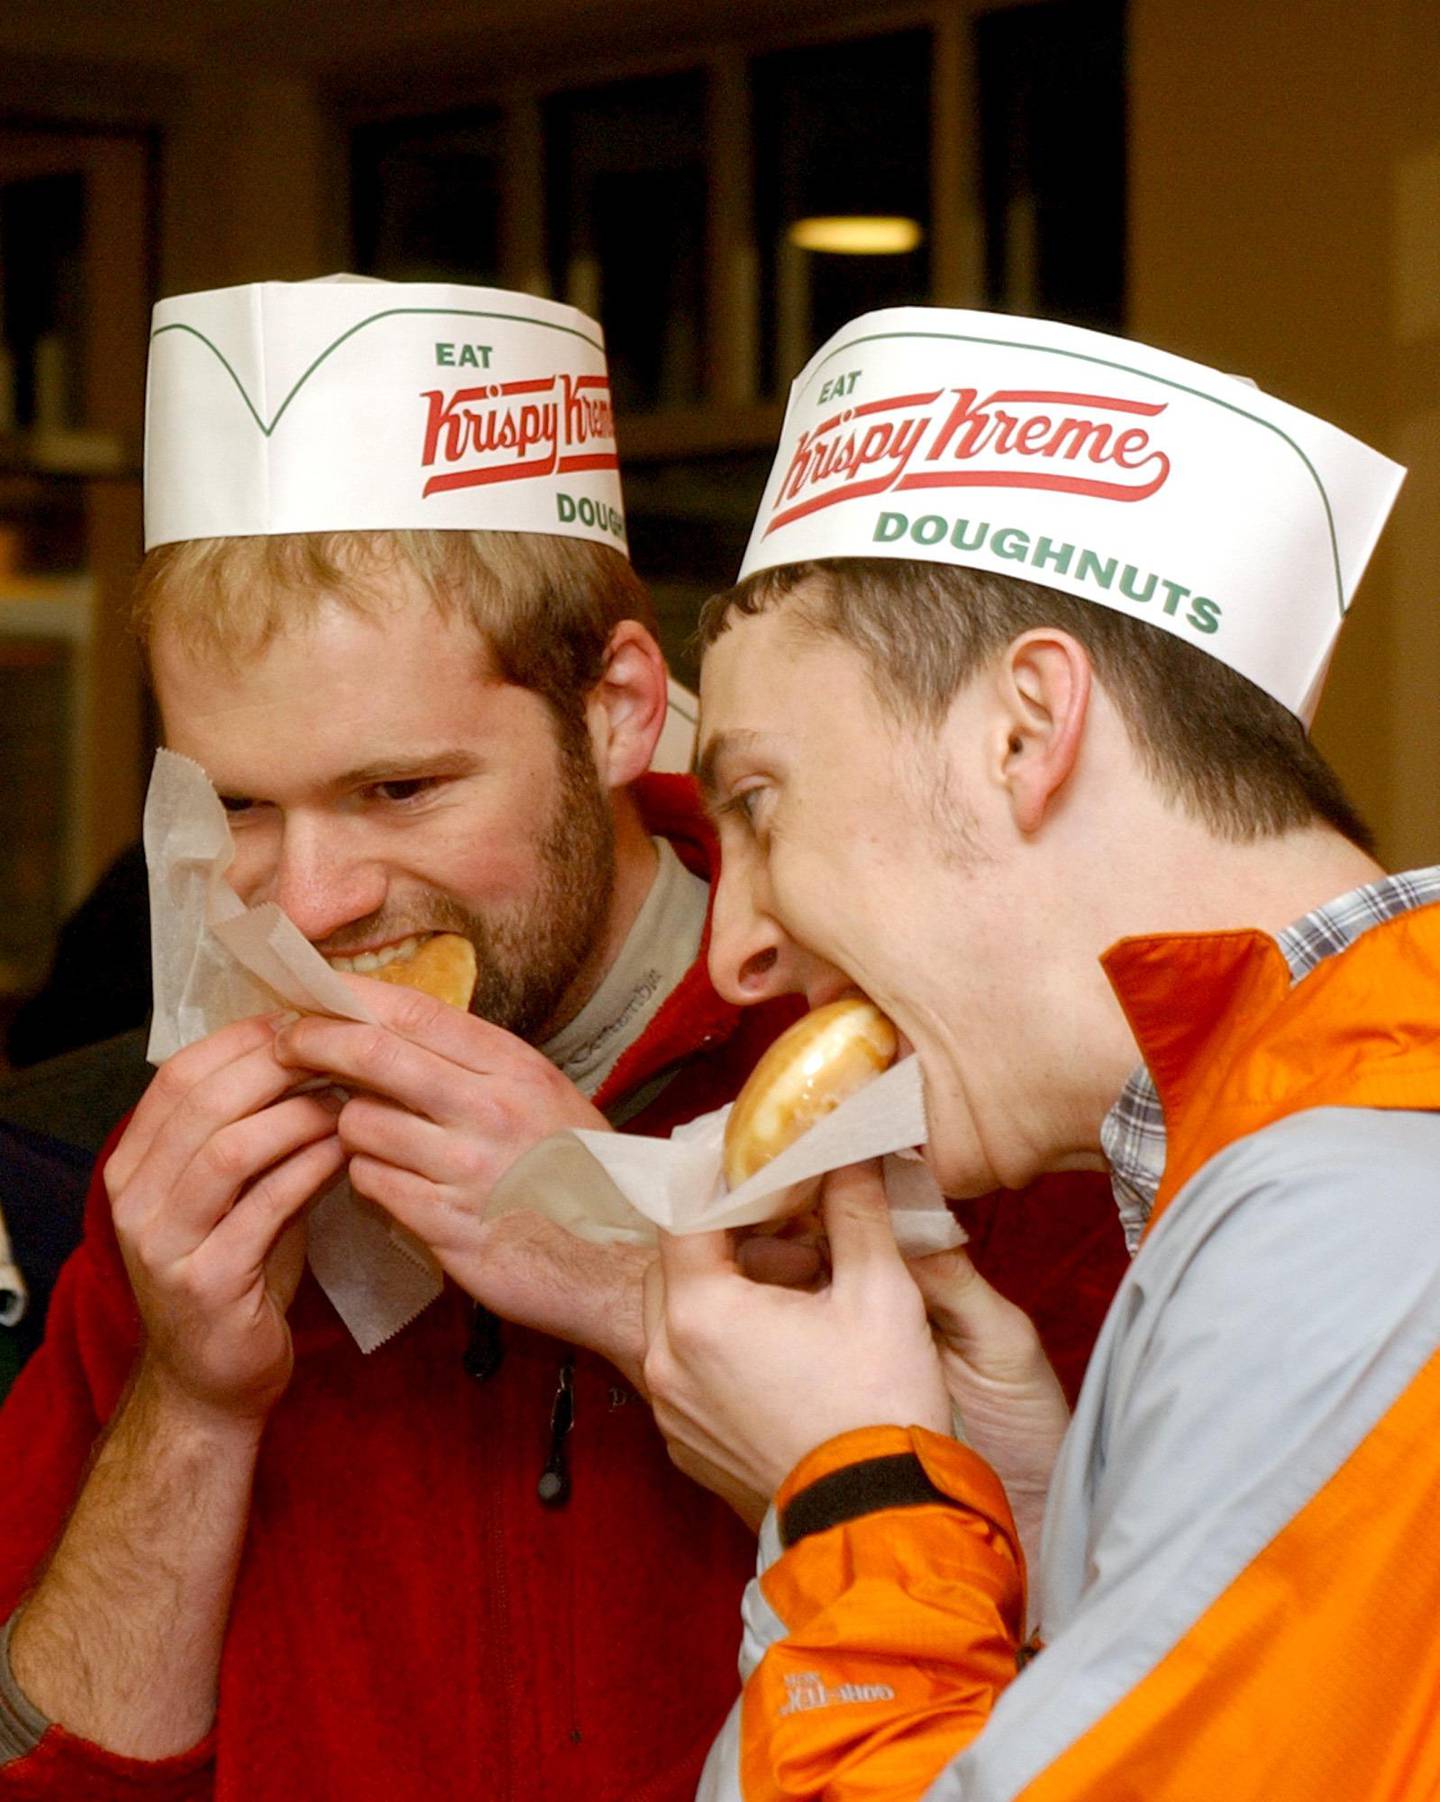 ** ELIMINATES THE REFERENCE TO THE FIRST STORE IN THE STATE **  Dustin Howell, left, and Daniel Geraldson enjoy fresh baked glazed doughnuts before heading to school during the grand opening of Krispy Kreme Doughnuts in Little Rock, Ark., Tuesday, Feb. 17, 2004.  The new Little Rock Krispy Kreme, which has the capacity to make over 2,000 doughnuts an hour, is the only one in the state. (AP Photo/Neemah Aaron)